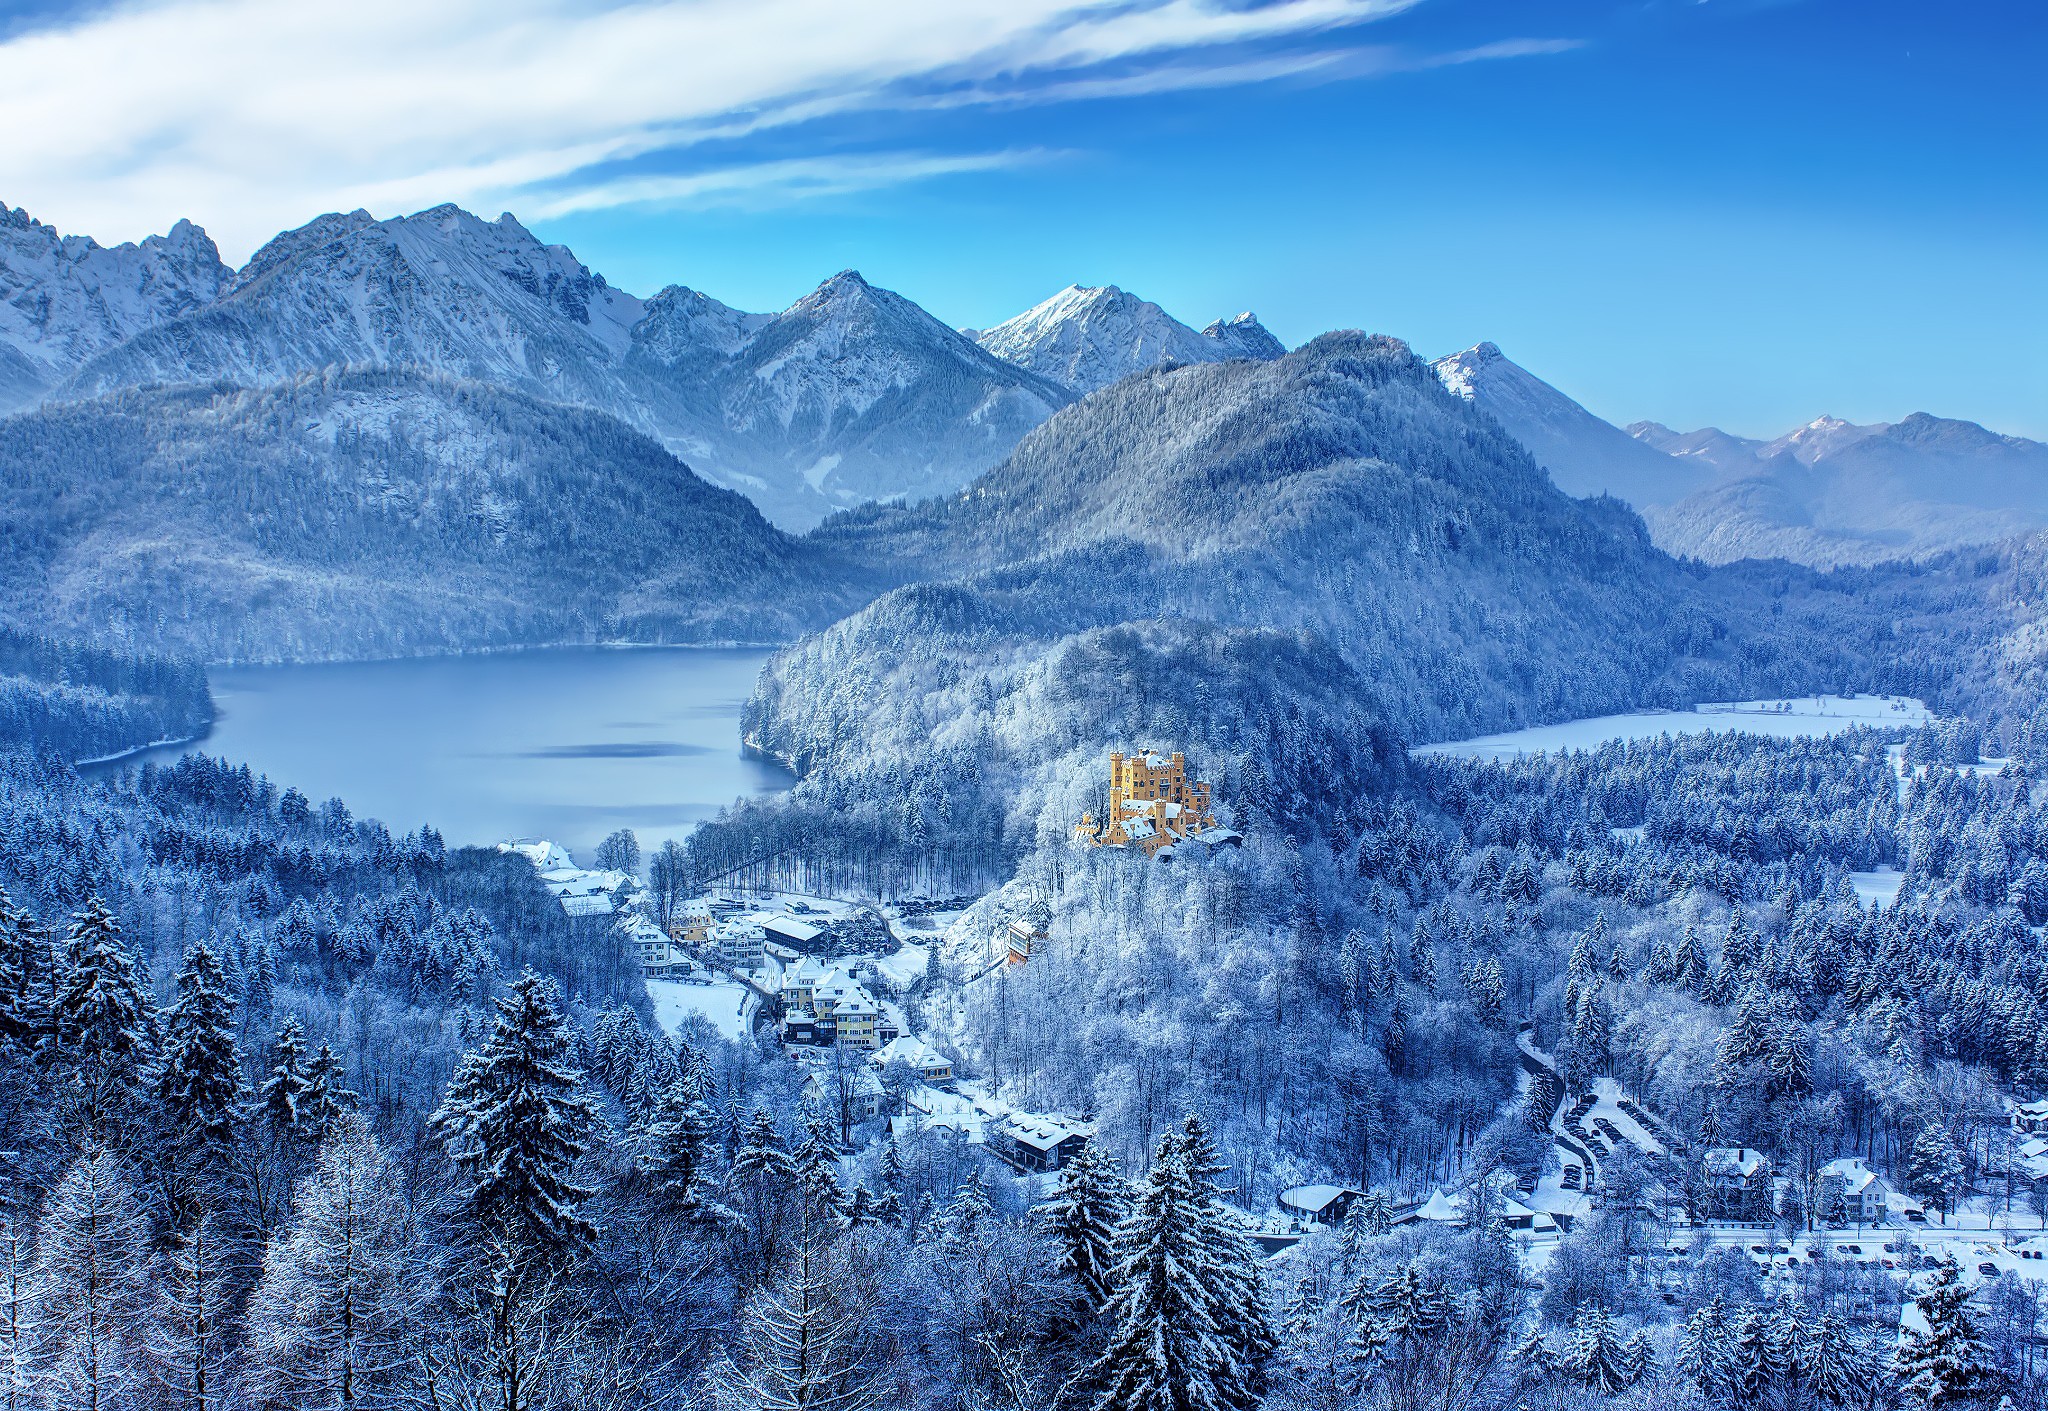 General 2048x1411 nature landscape mountains trees forest Germany winter snow castle house lake clouds Bavaria